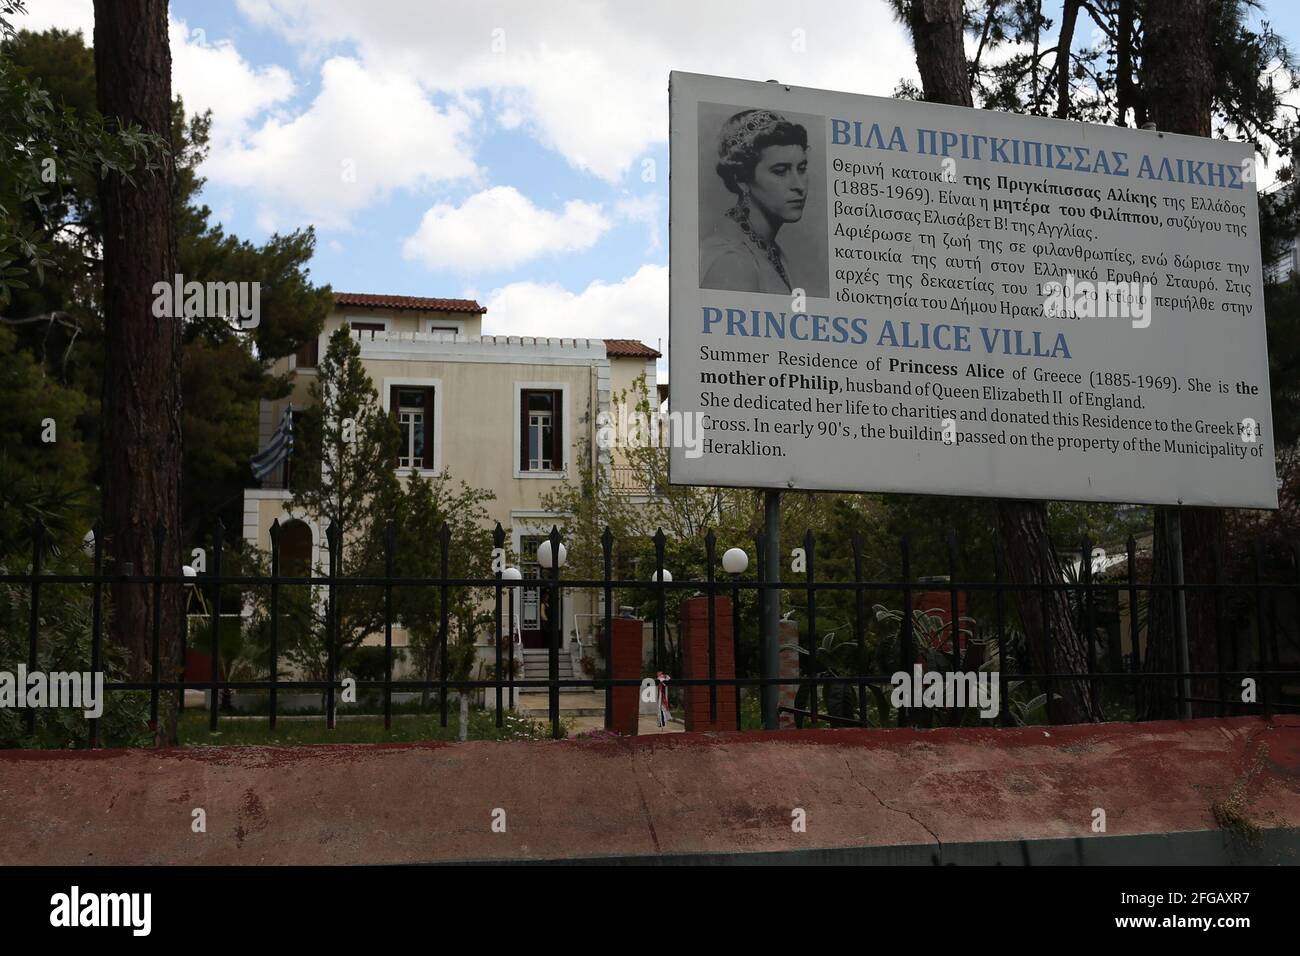 Summer Residence of Princess Alice of Greece at Neo Heraclion district in Athens.  Princess Alice of Battenberg was the mother of Prince Philip and mother-in-law of Queen Elizabeth II. After marrying Prince Andrew of Greece and Denmark in 1903, she adopted the style of her husband, becoming Princess Andrew of Greece and Denmark. She lived in Greece until the exile of most of the Greek royal family in 1917. On returning to Greece a few years later, her husband was blamed in part for the country's defeat in the Greco-Turkish War (1919–1922), and the family was once again forced into exile until Stock Photo